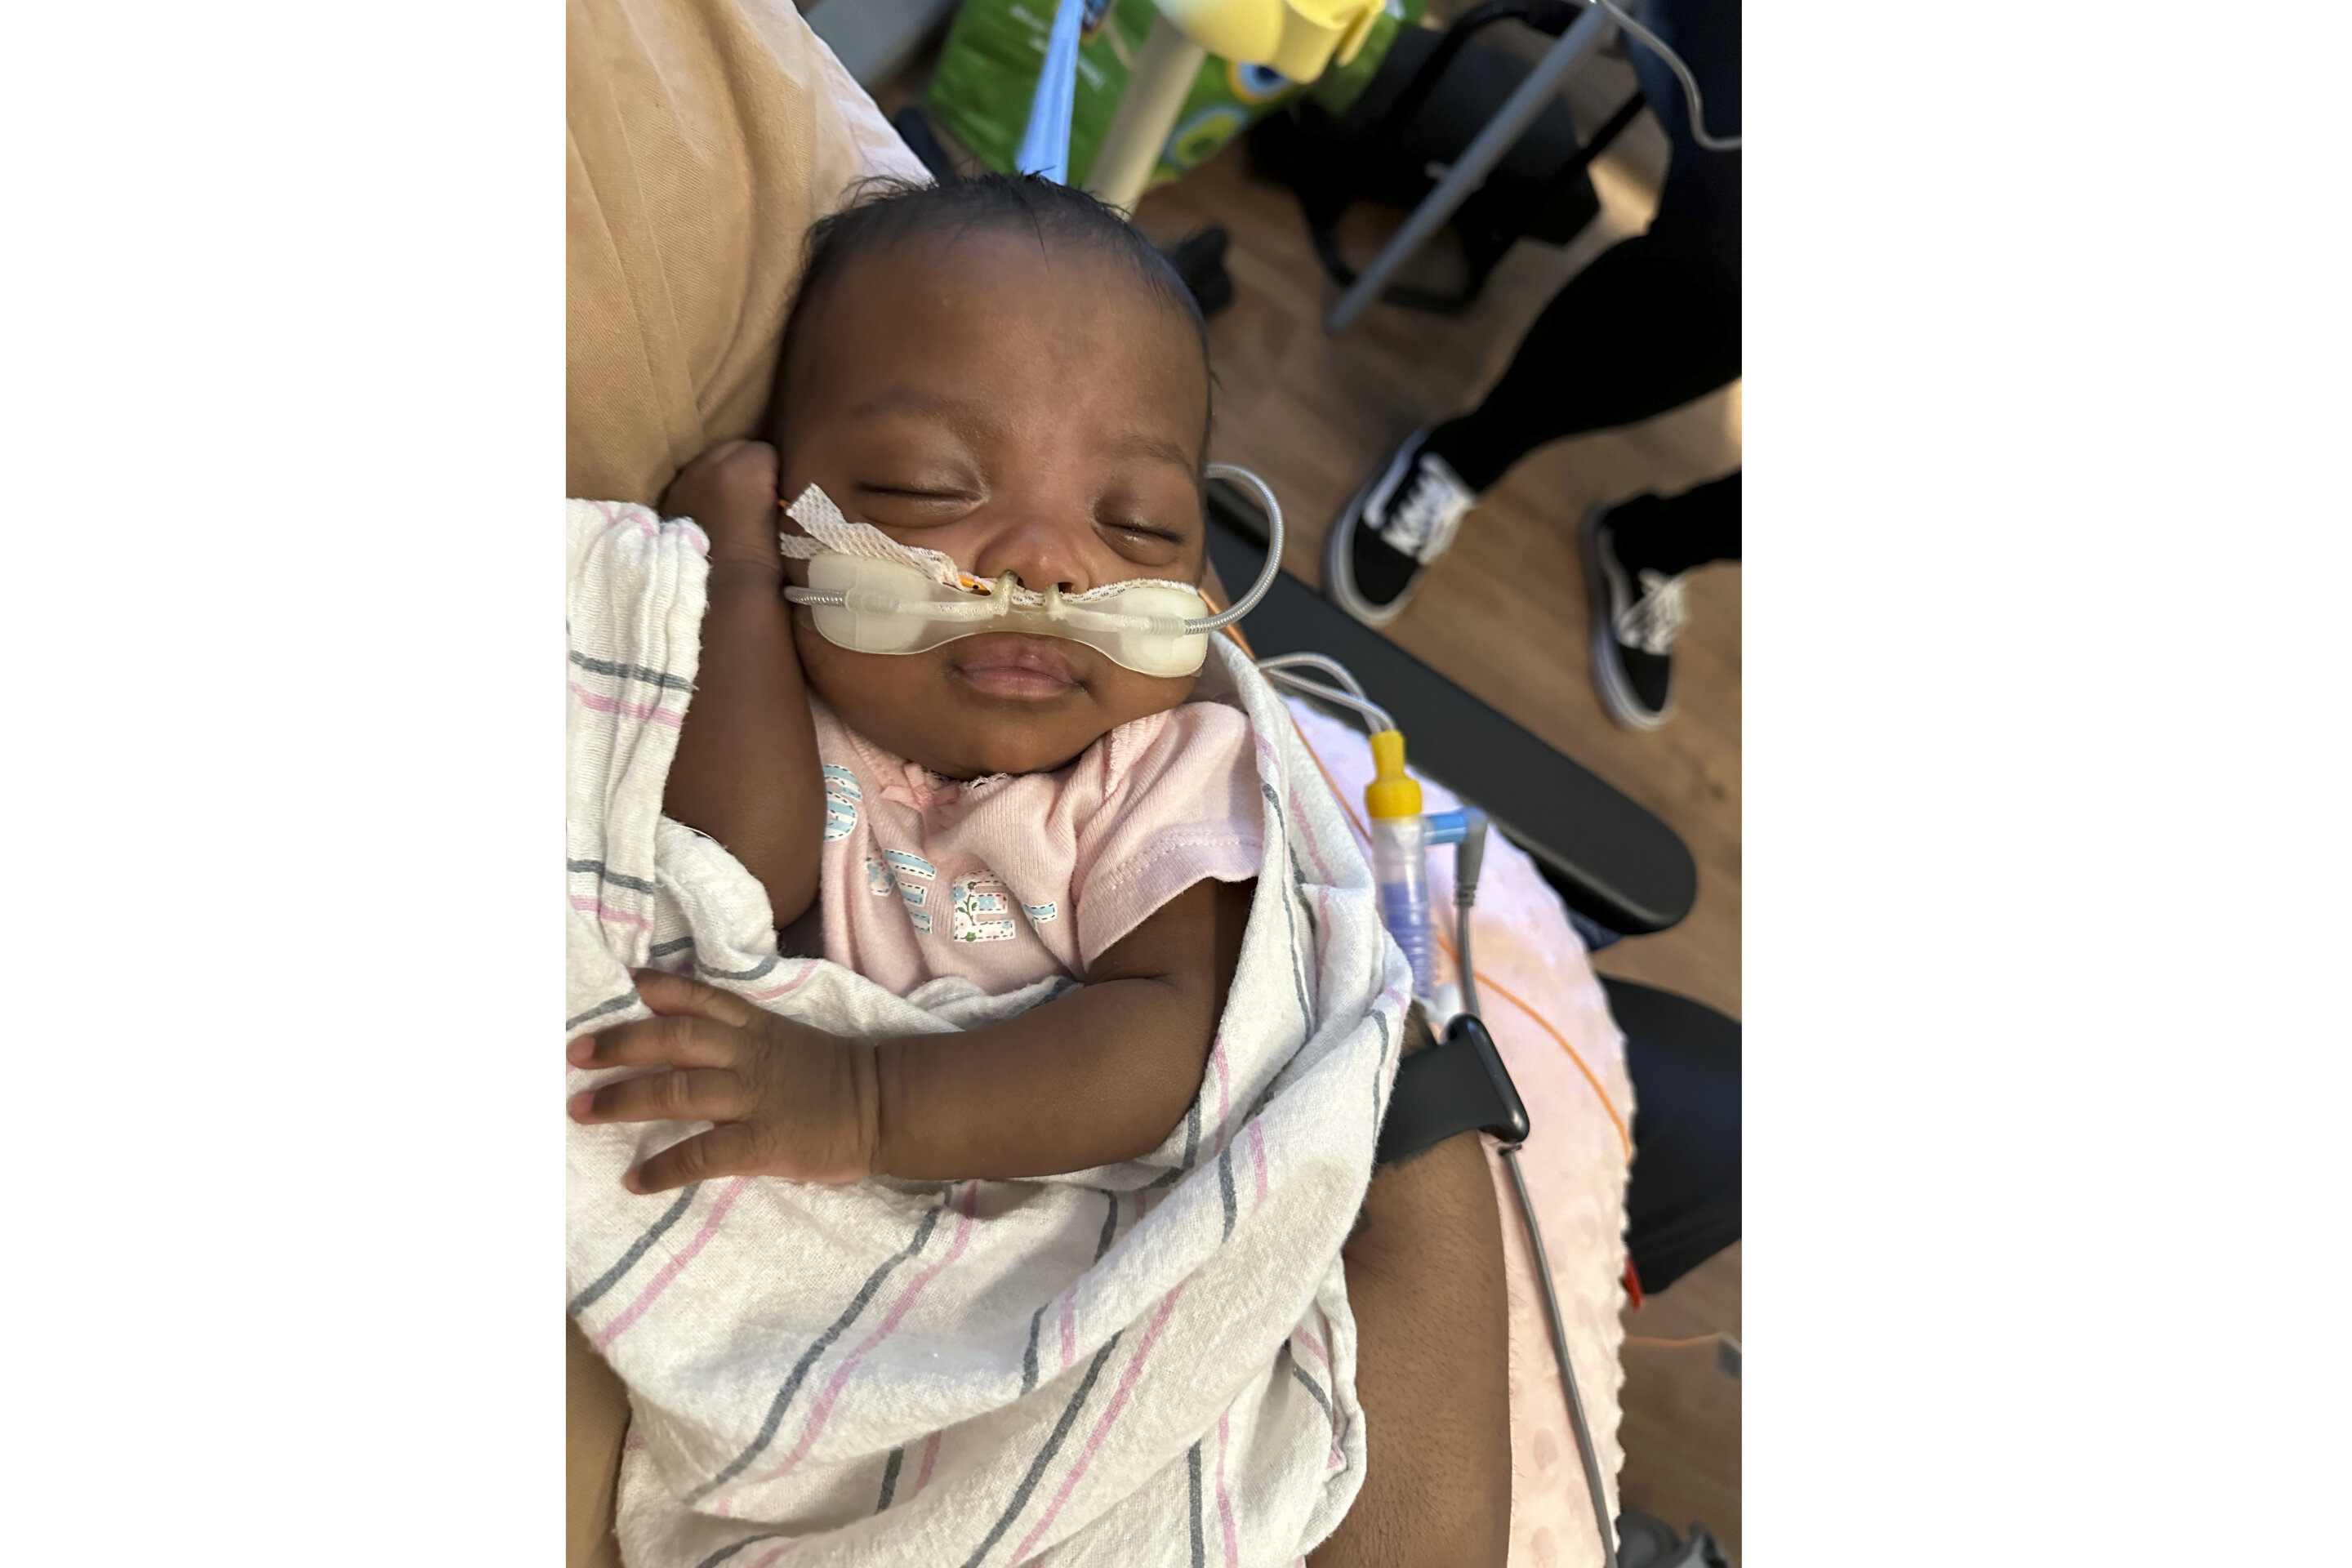 #’Micropreemie’ baby who weighed just over 1 pound at birth goes home from Illinois hospital